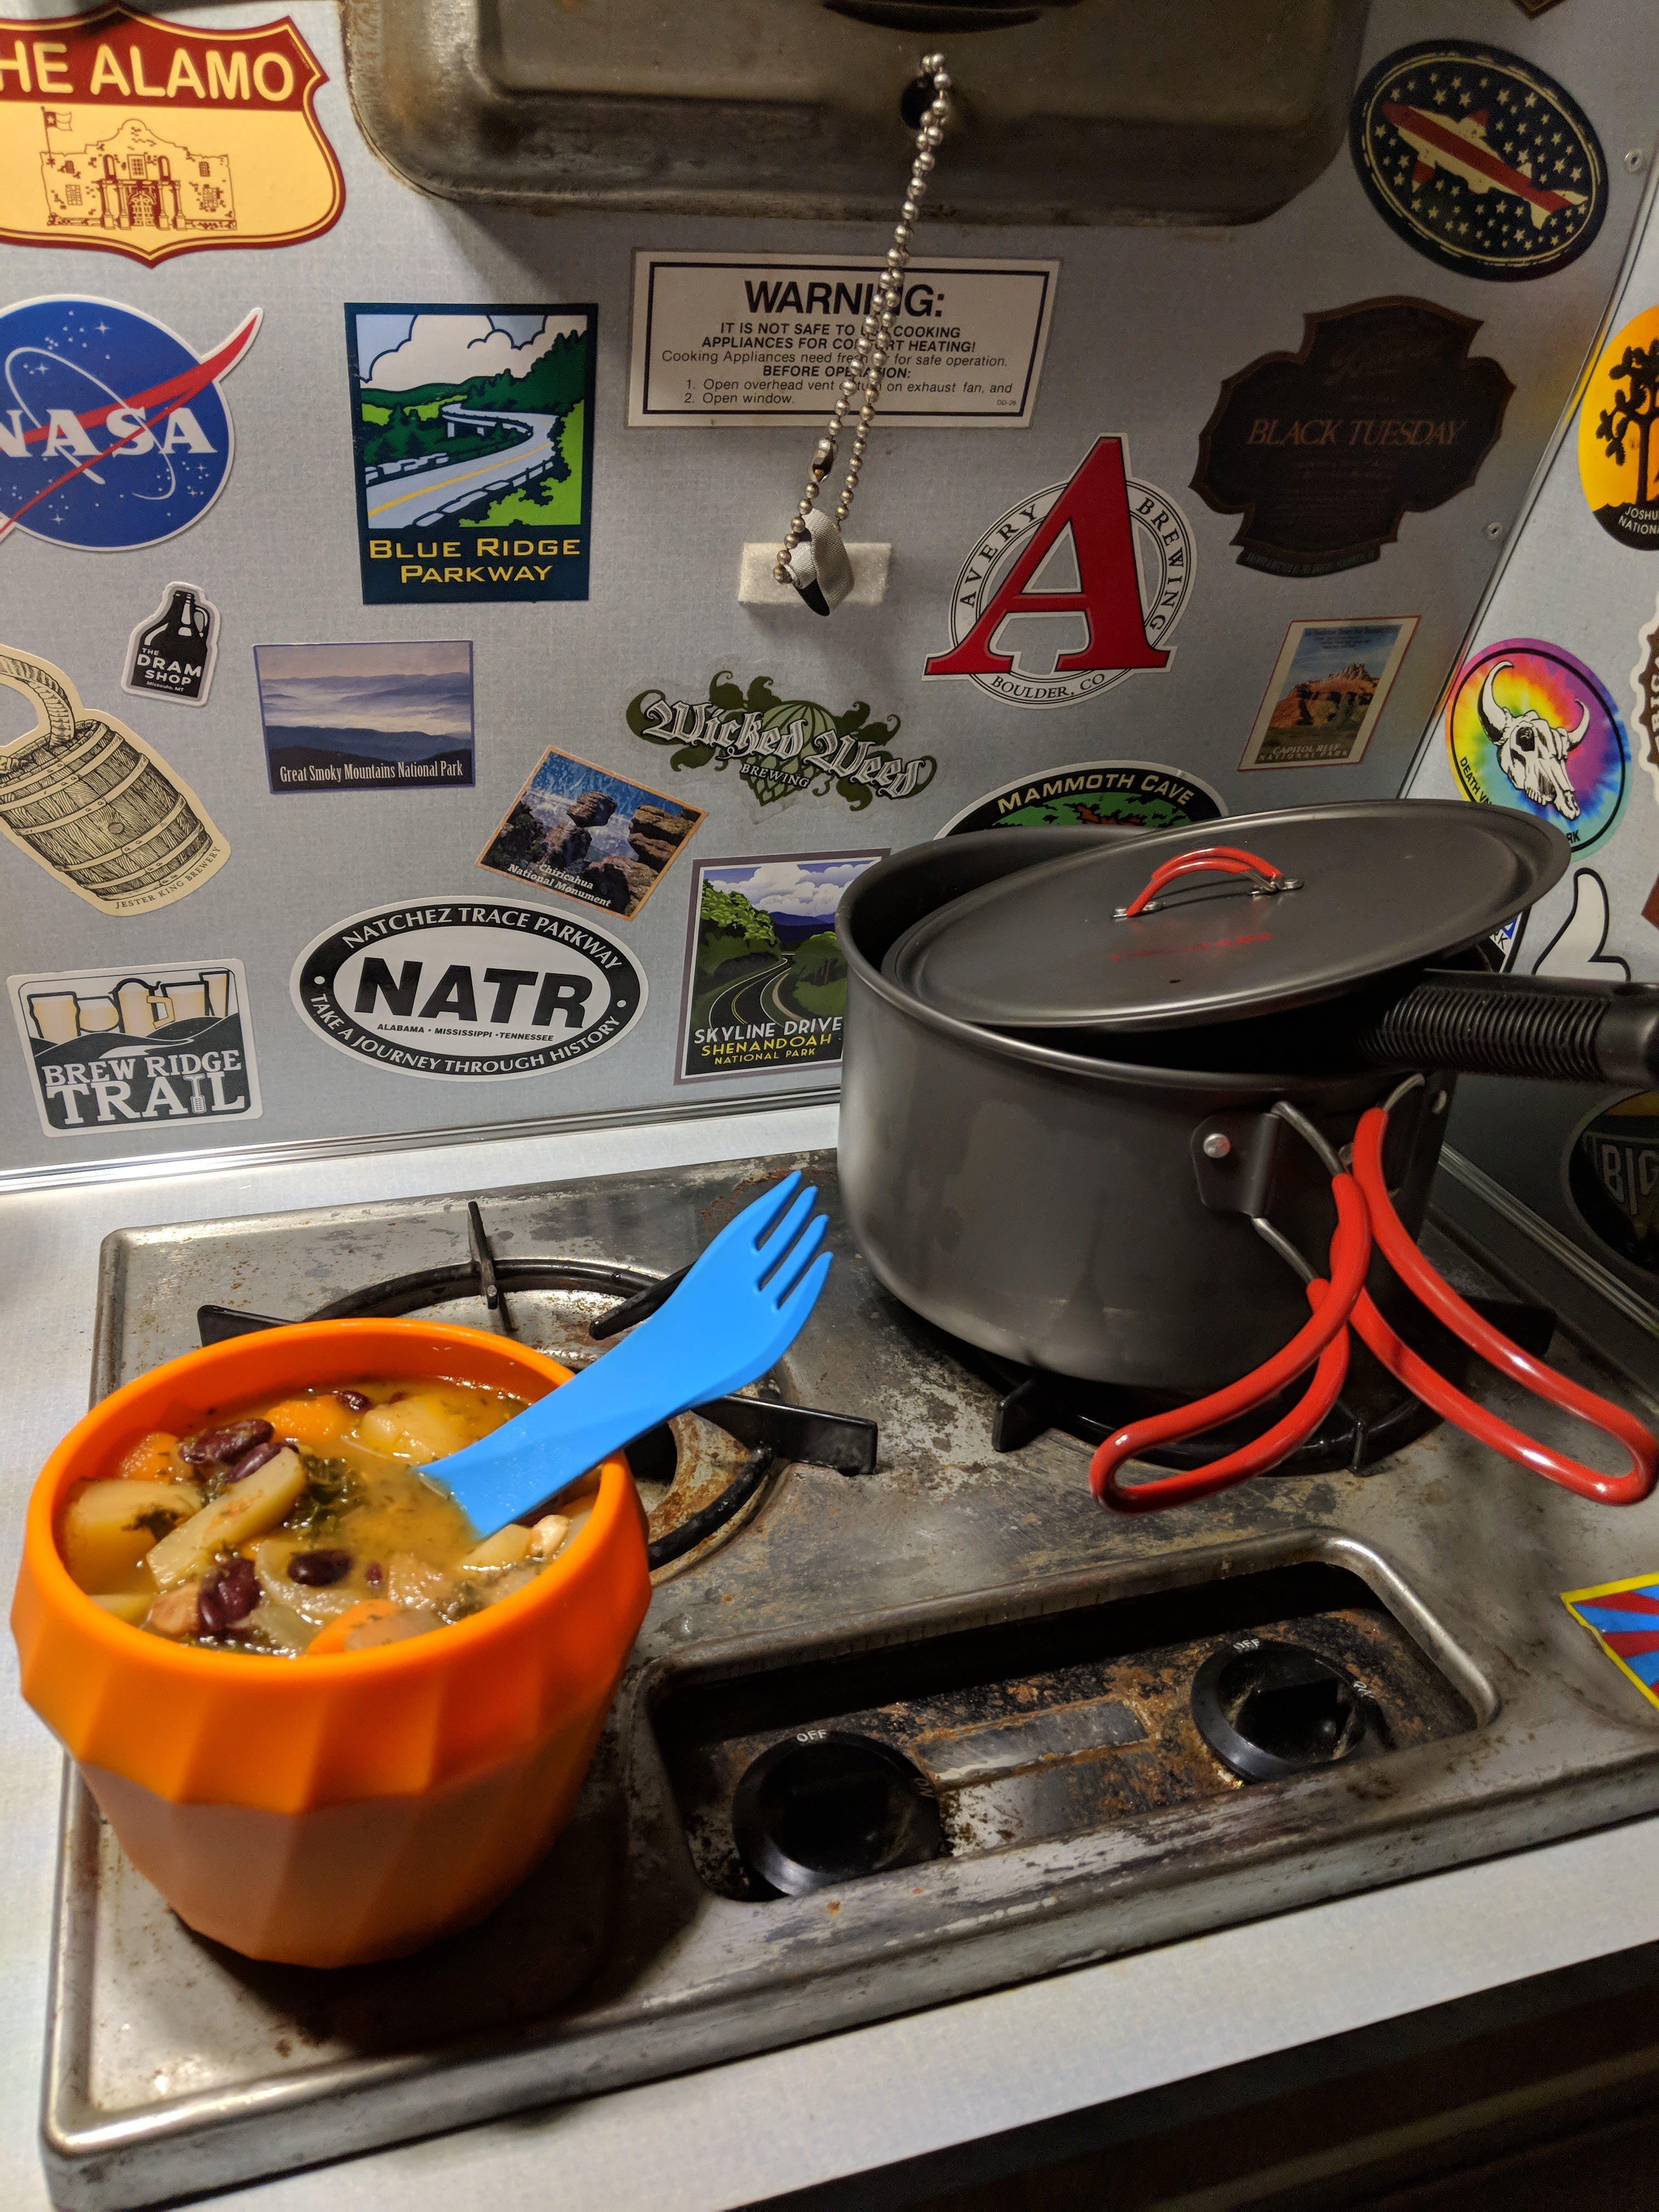 After heating up some soup in our campervan, we're ready to head out to the campfire for dinner (featuring our humangear FlexiBowl and GoBites utensil). 